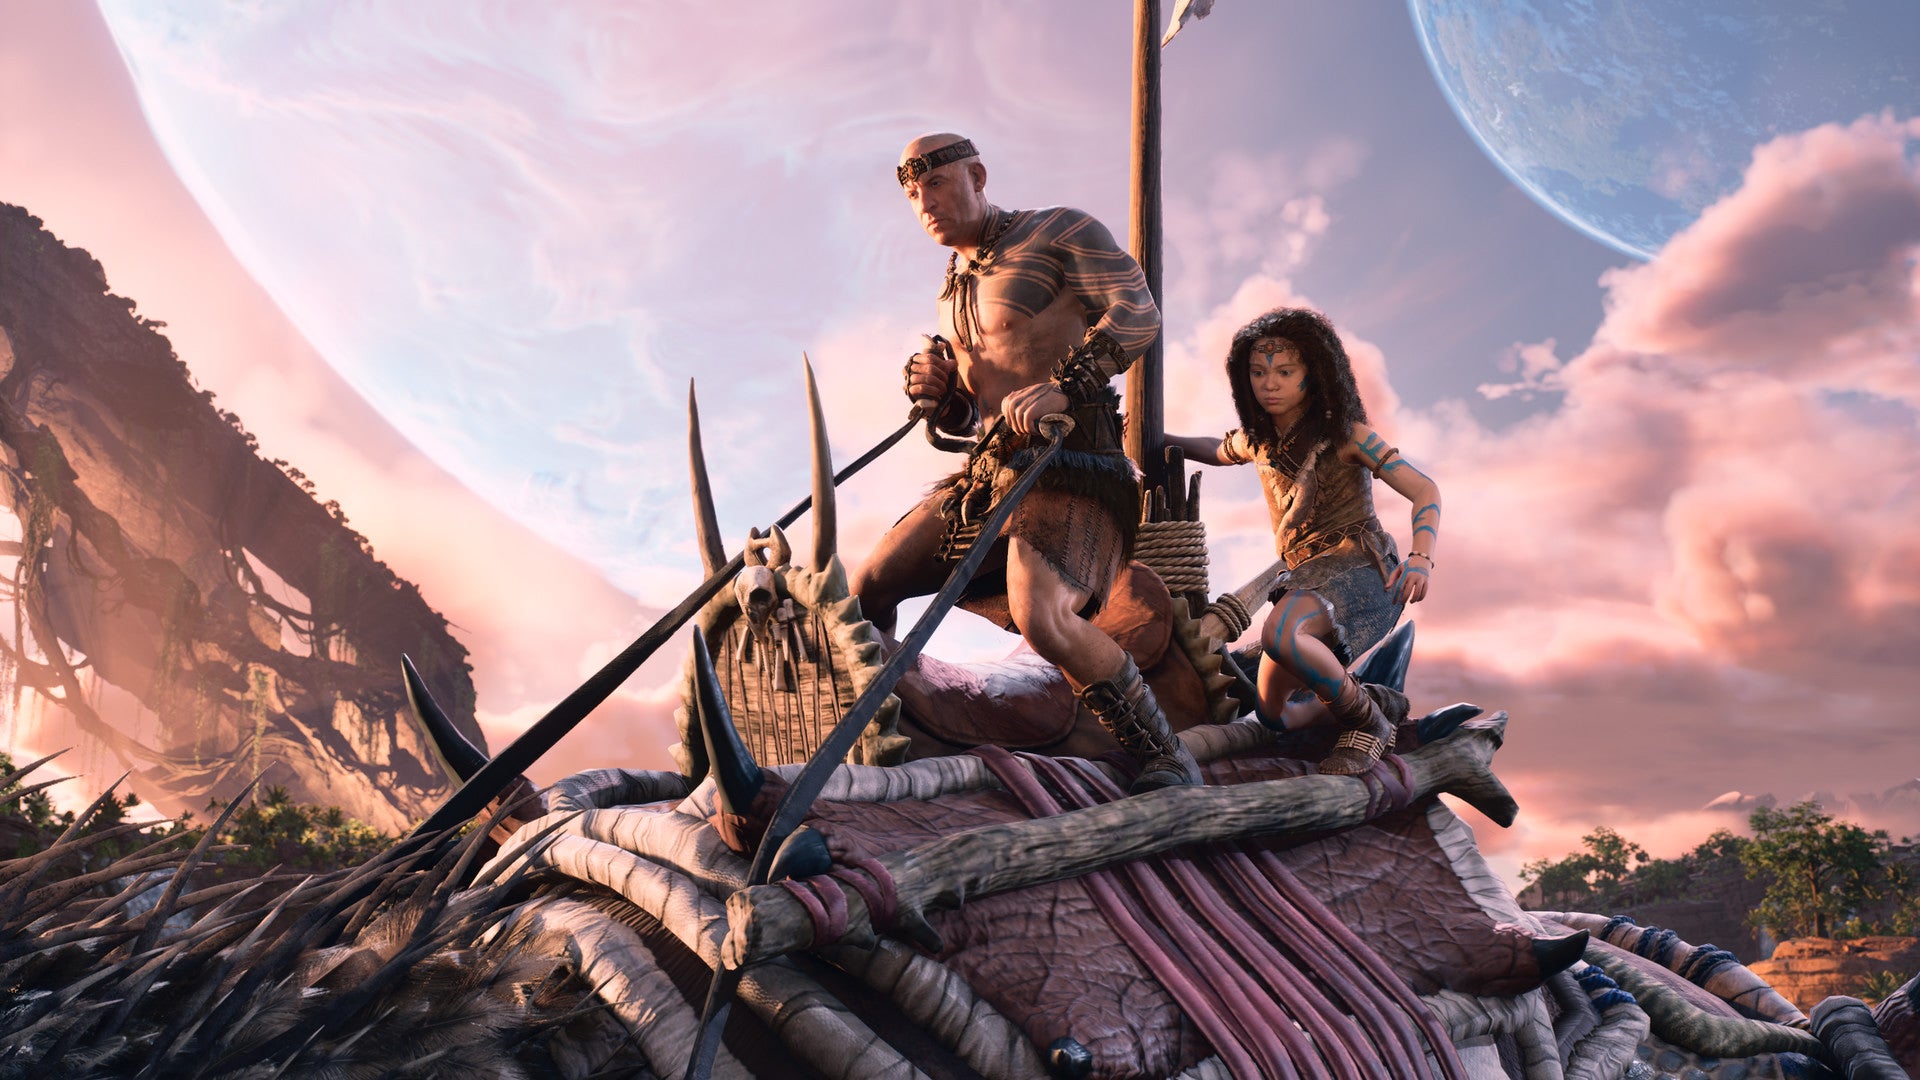 A promotional screenshot for ARK 2, featuring Vin Diesel's character Santiago and the young child he cares for, riding atop a giant dinosaur mount.